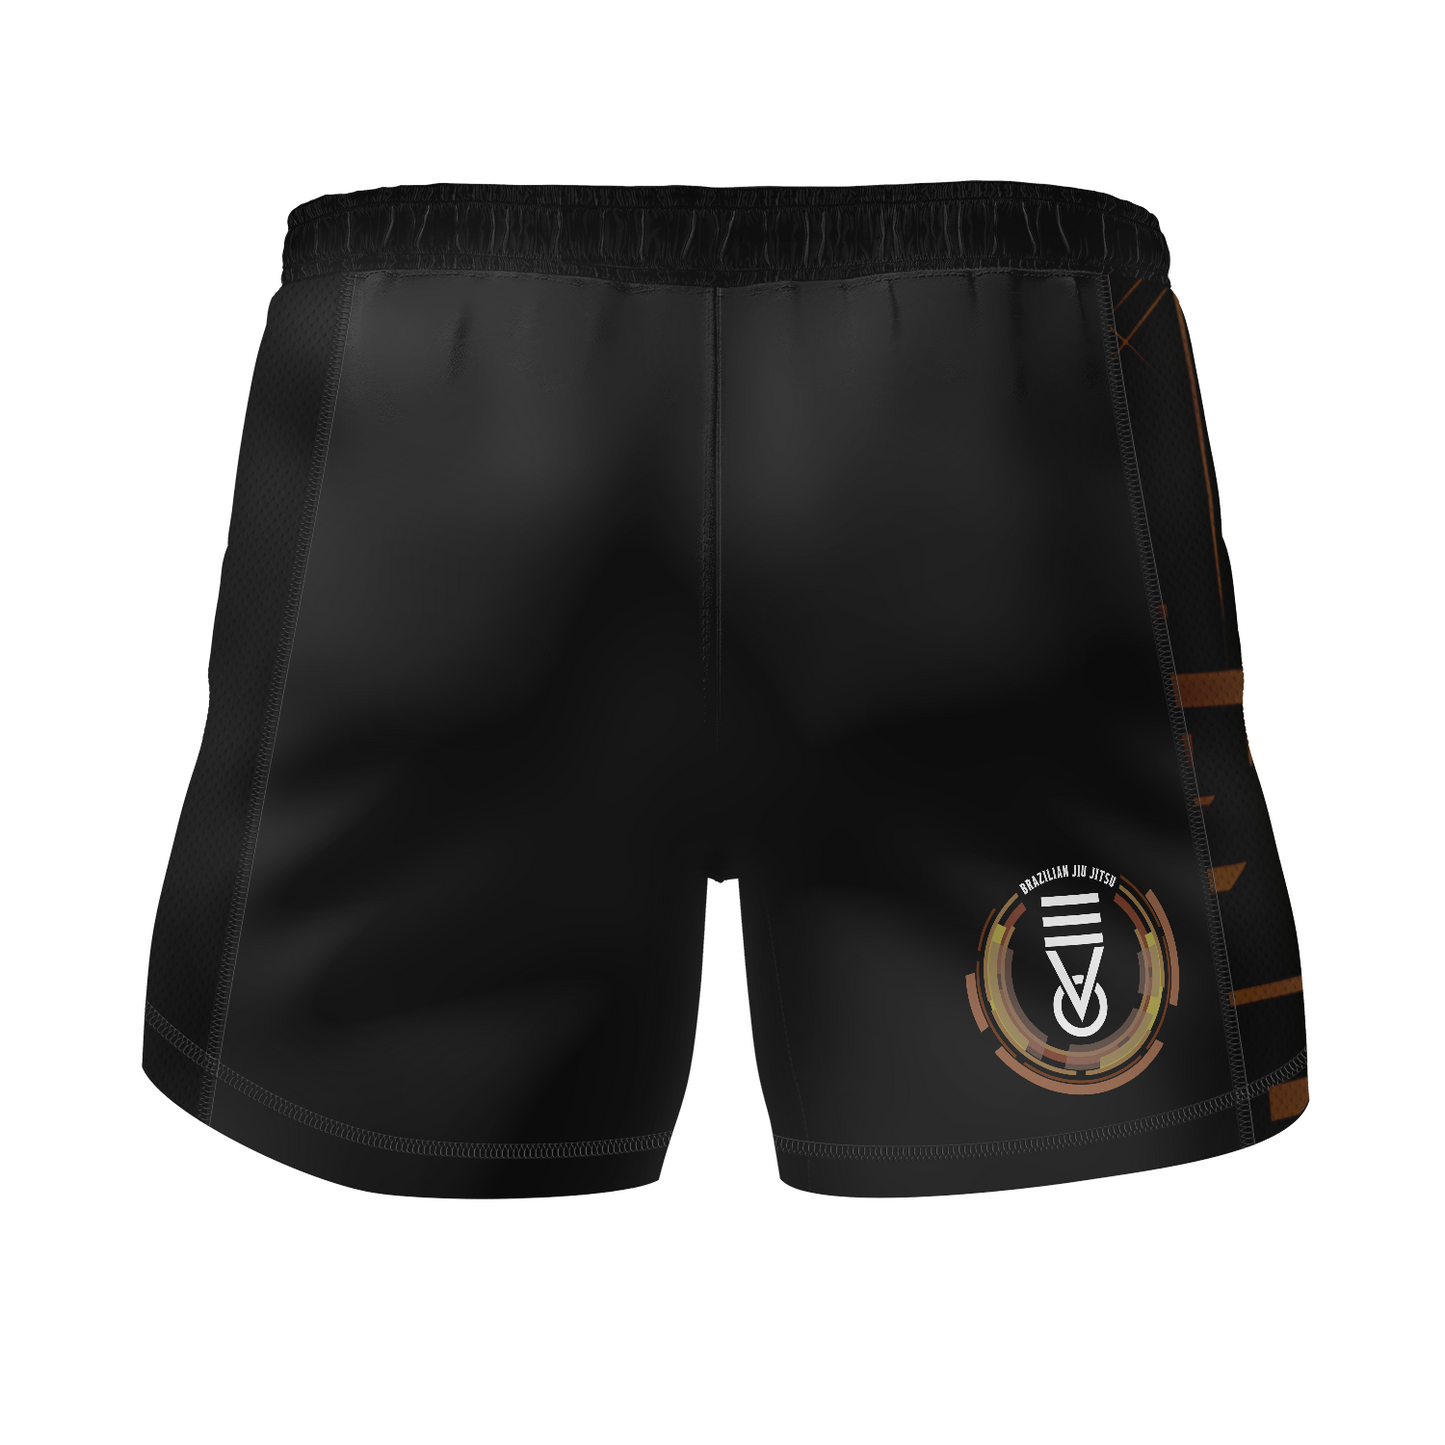 Evo BJJ fight shorts Ranked, black and brown